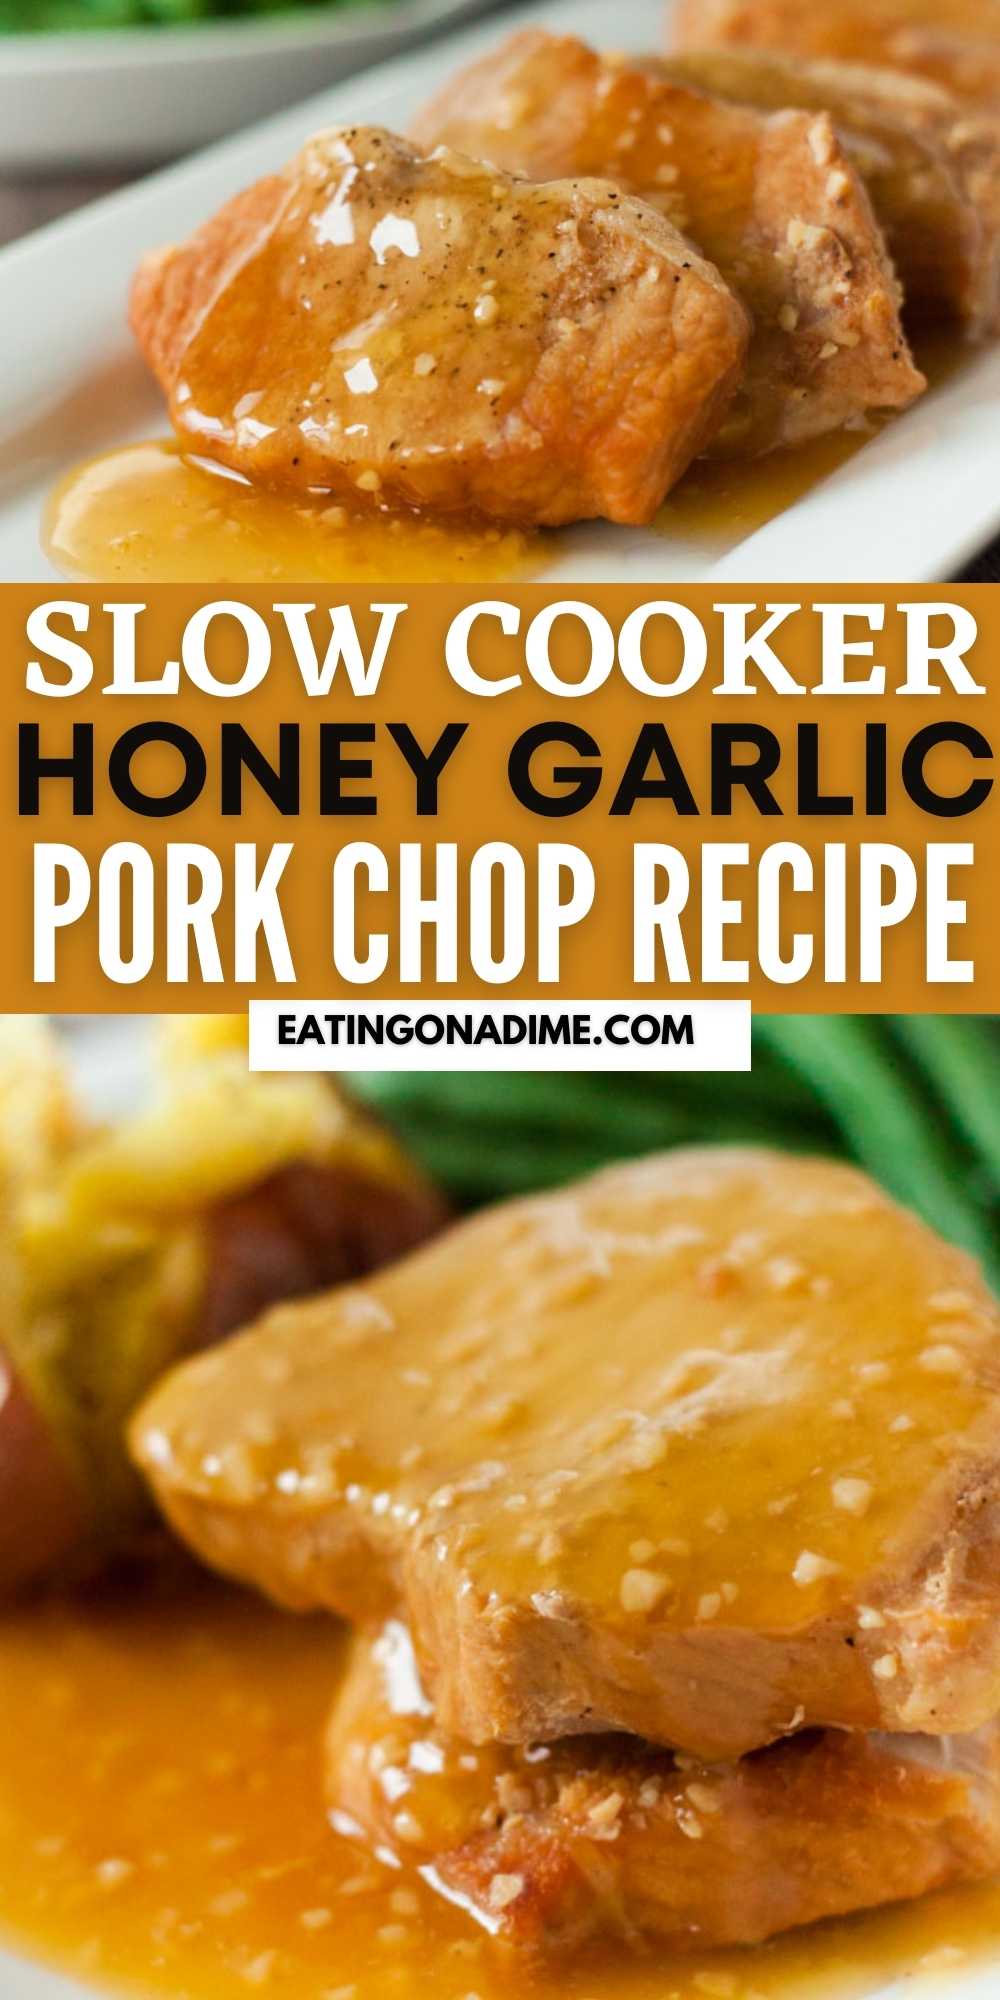 Try making Crock Pot Honey Garlic Pork Chops Recipe for a meal that is simply amazing. The honey garlic marinade makes each bite delicious. This slow cooker easy pork chops will be one of your family’s favorite recipes! #eatingonadime #crockpotrecipes #porkchoprecipes #slowcookerrecipes 
